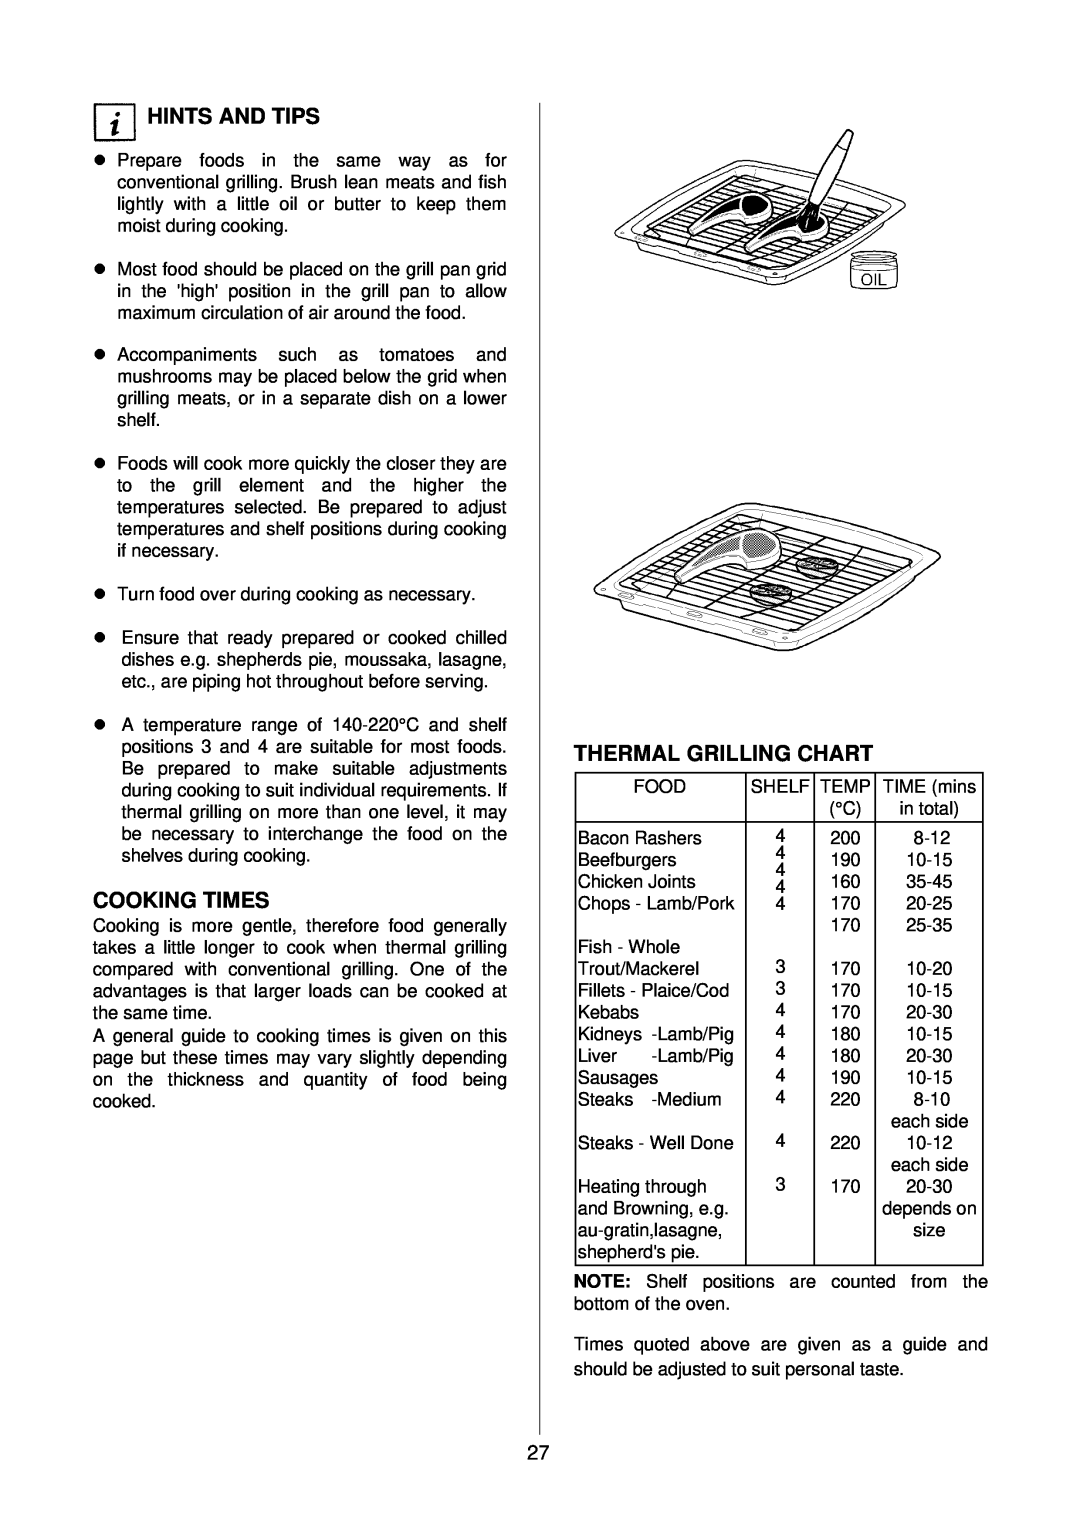 Electrolux D4100-1 operating instructions Thermal Grilling Chart, Hints And Tips, Cooking Times, size 